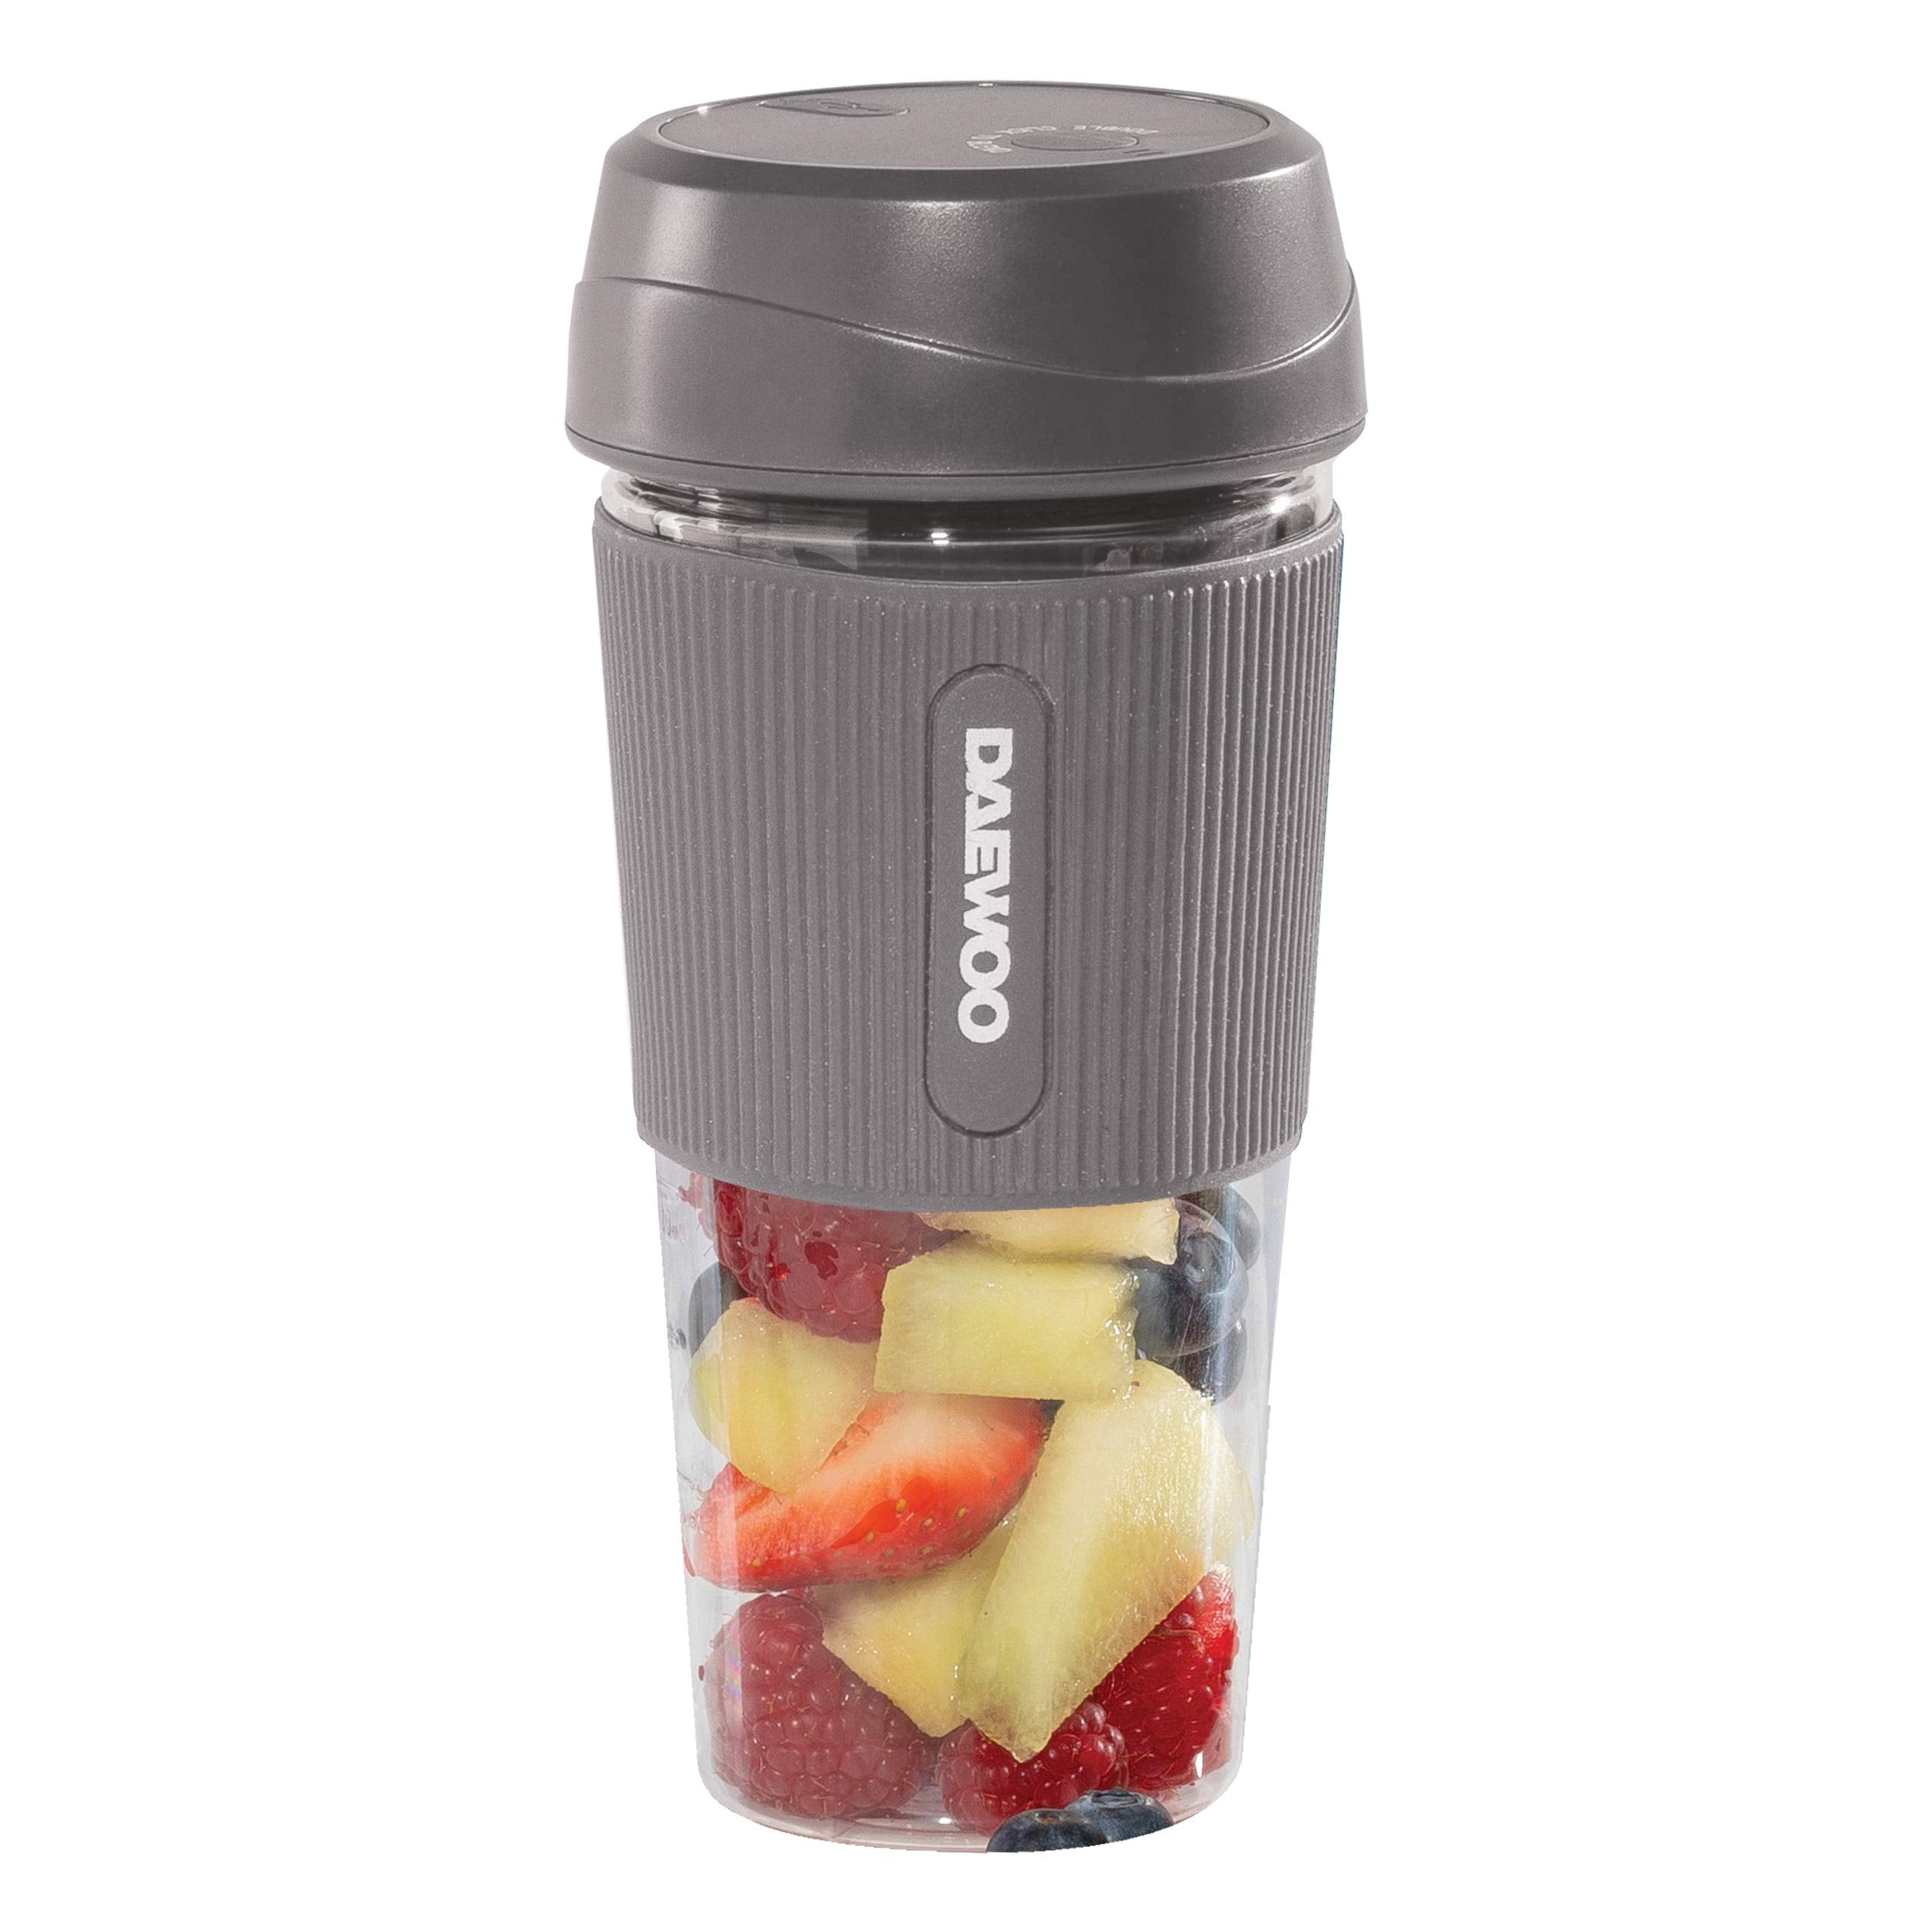 Daewoo Portable Rechargeable Protein Blender, with 300ml Capacity and Drinking Lid Included,1200mh Built-in Battery Lasts Up to 6-10 Cycles, Perfect for Smoothies, Protein shakes and Juices On The go.